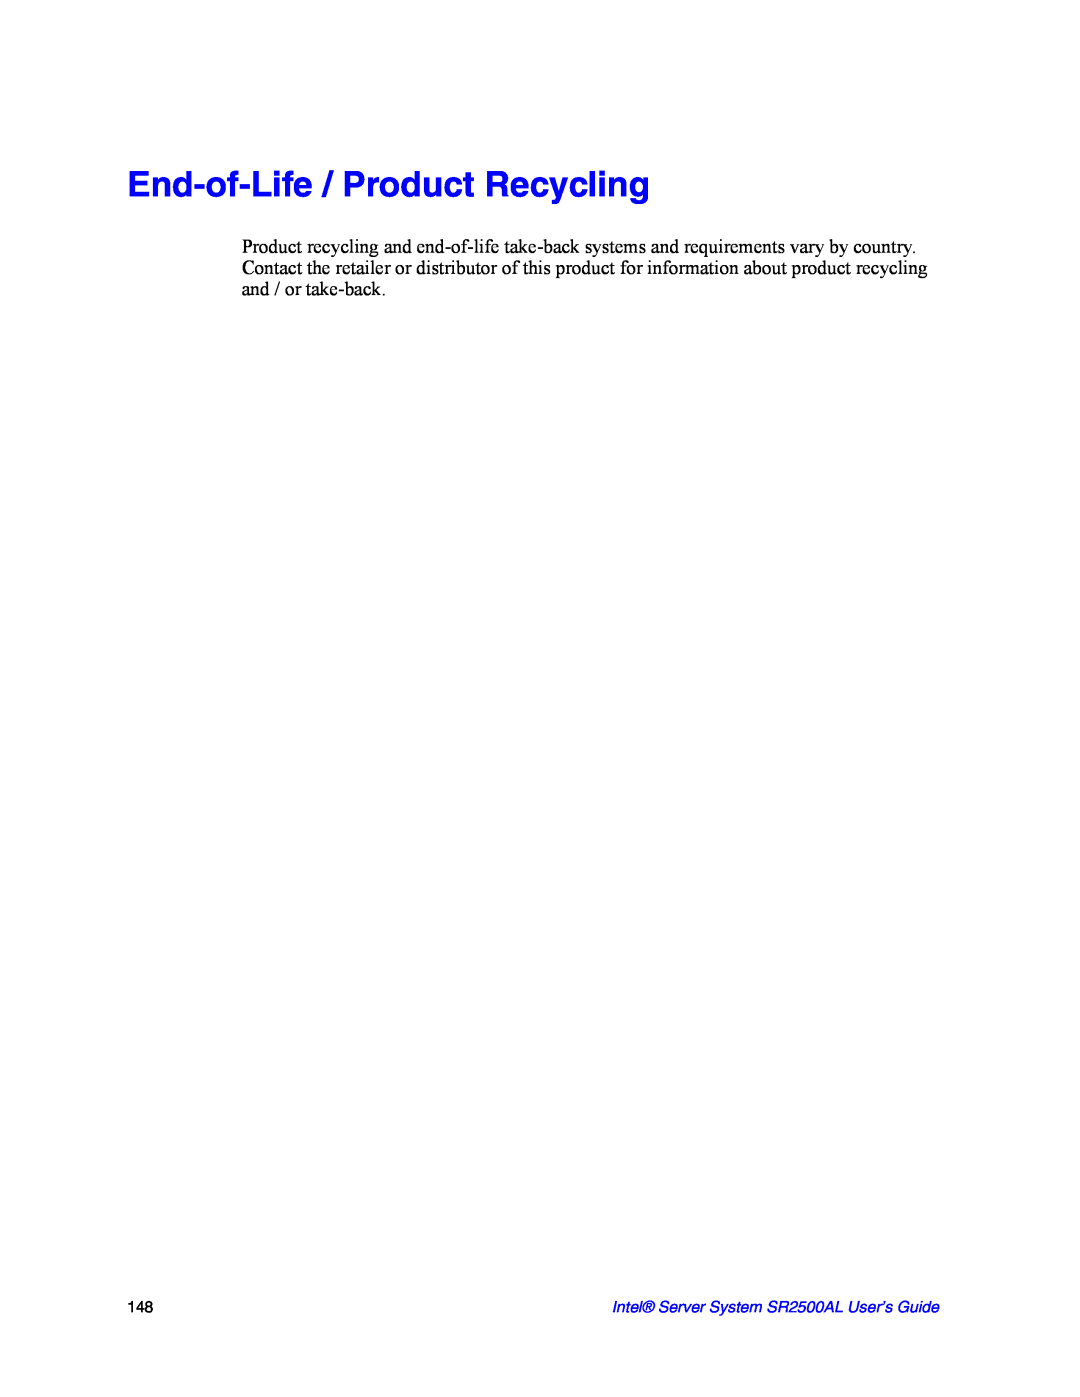 Intel manual End-of-Life / Product Recycling, Intel Server System SR2500AL User’s Guide 